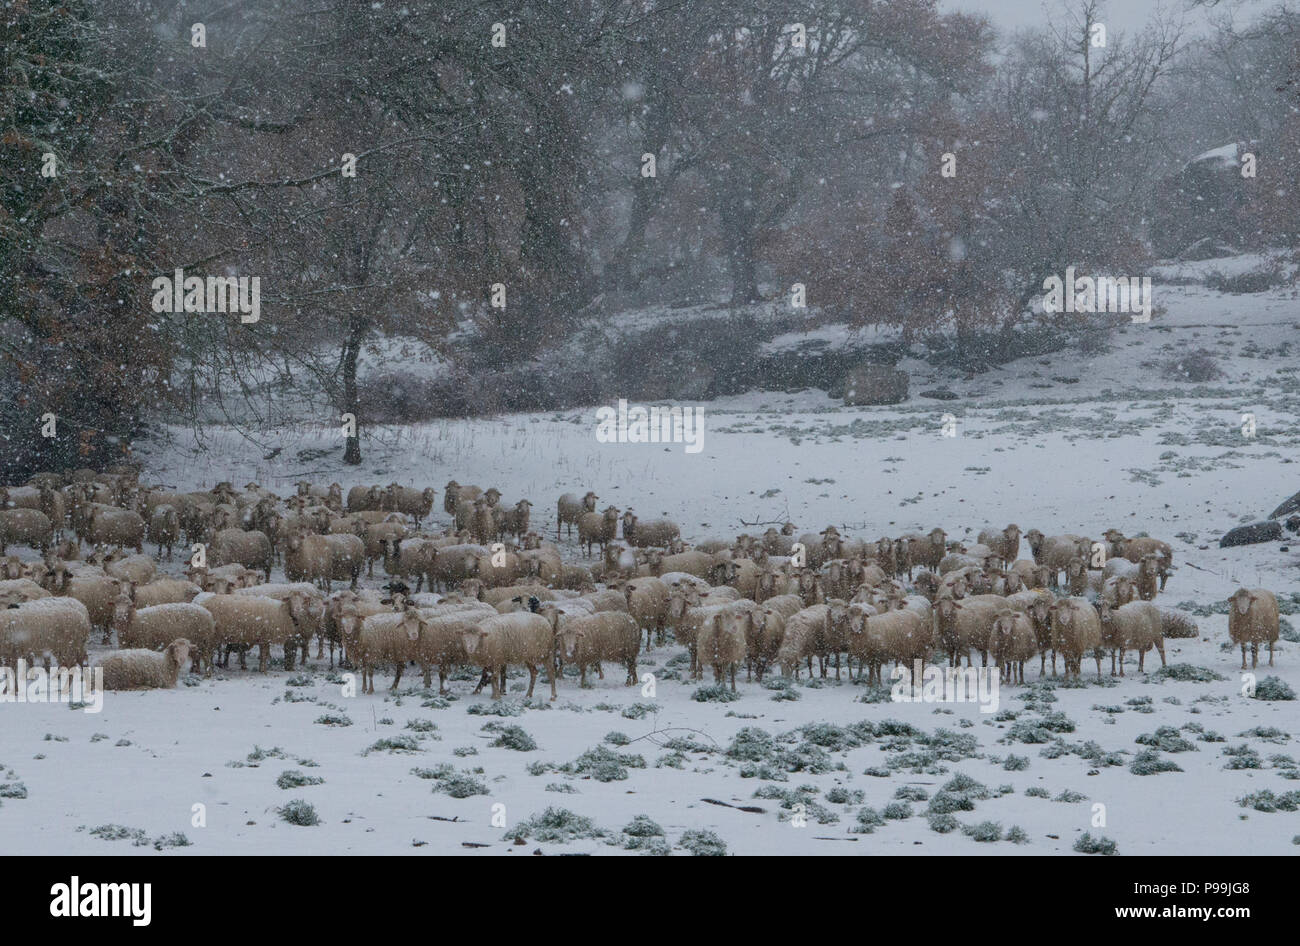 Sheep (Ovis orientalis), flock of sheep in the snow with trees in background, Mammoiada  Sardinia, Italy Stock Photo